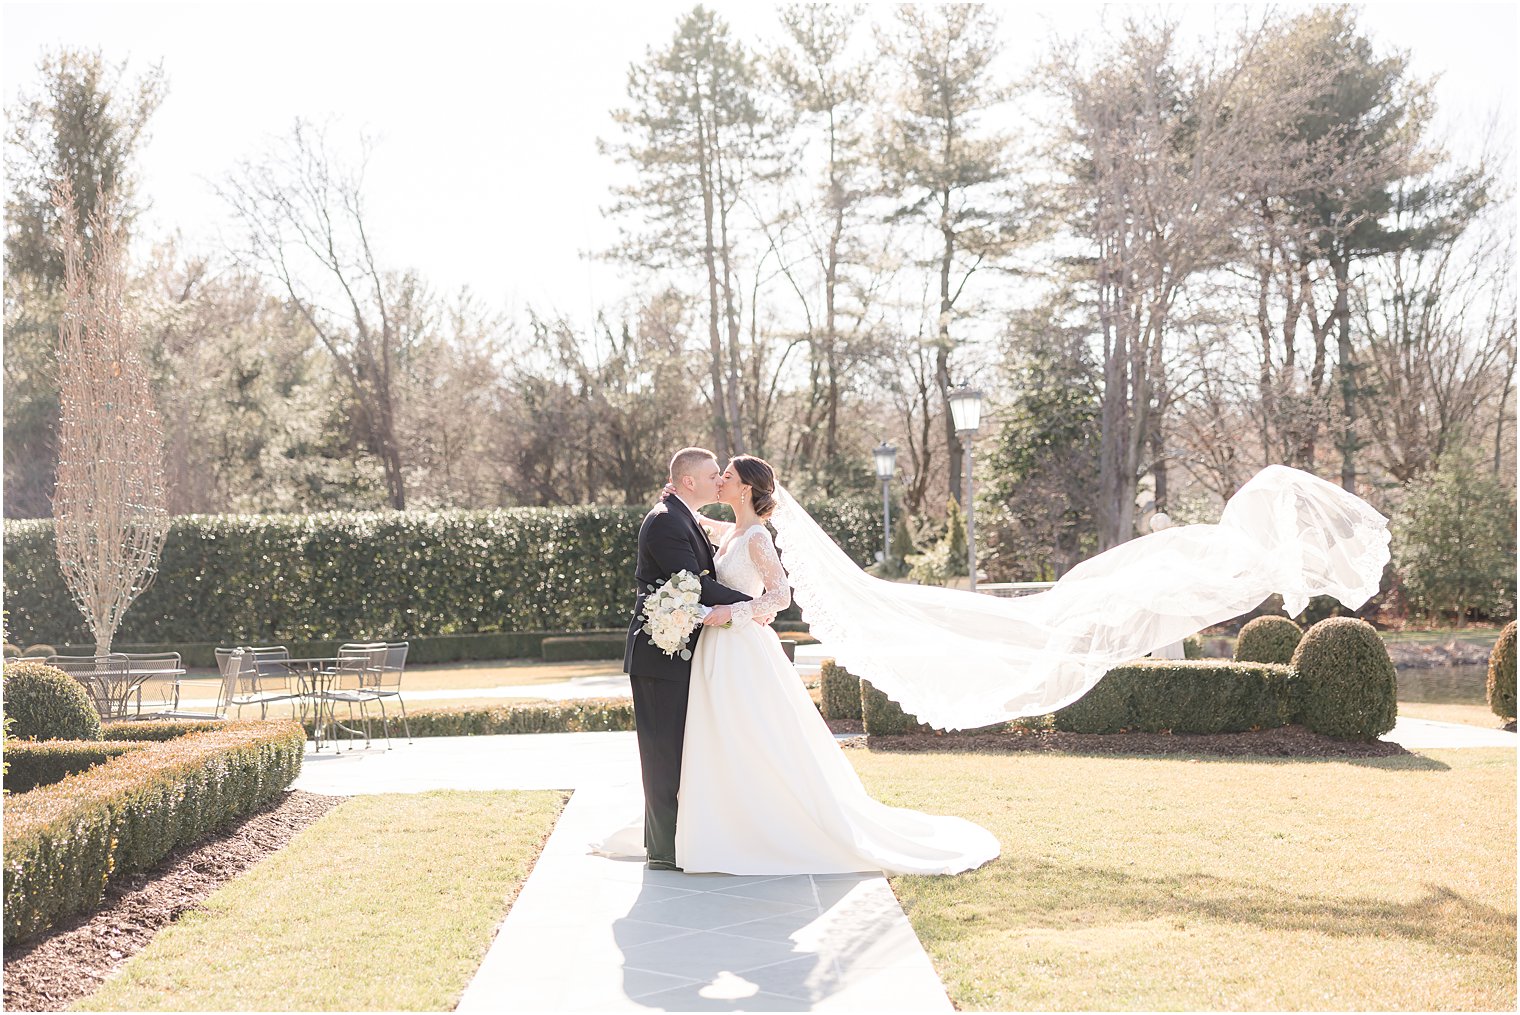 newlyweds kiss with bride's veil floating behind her at Park Chateau Estate